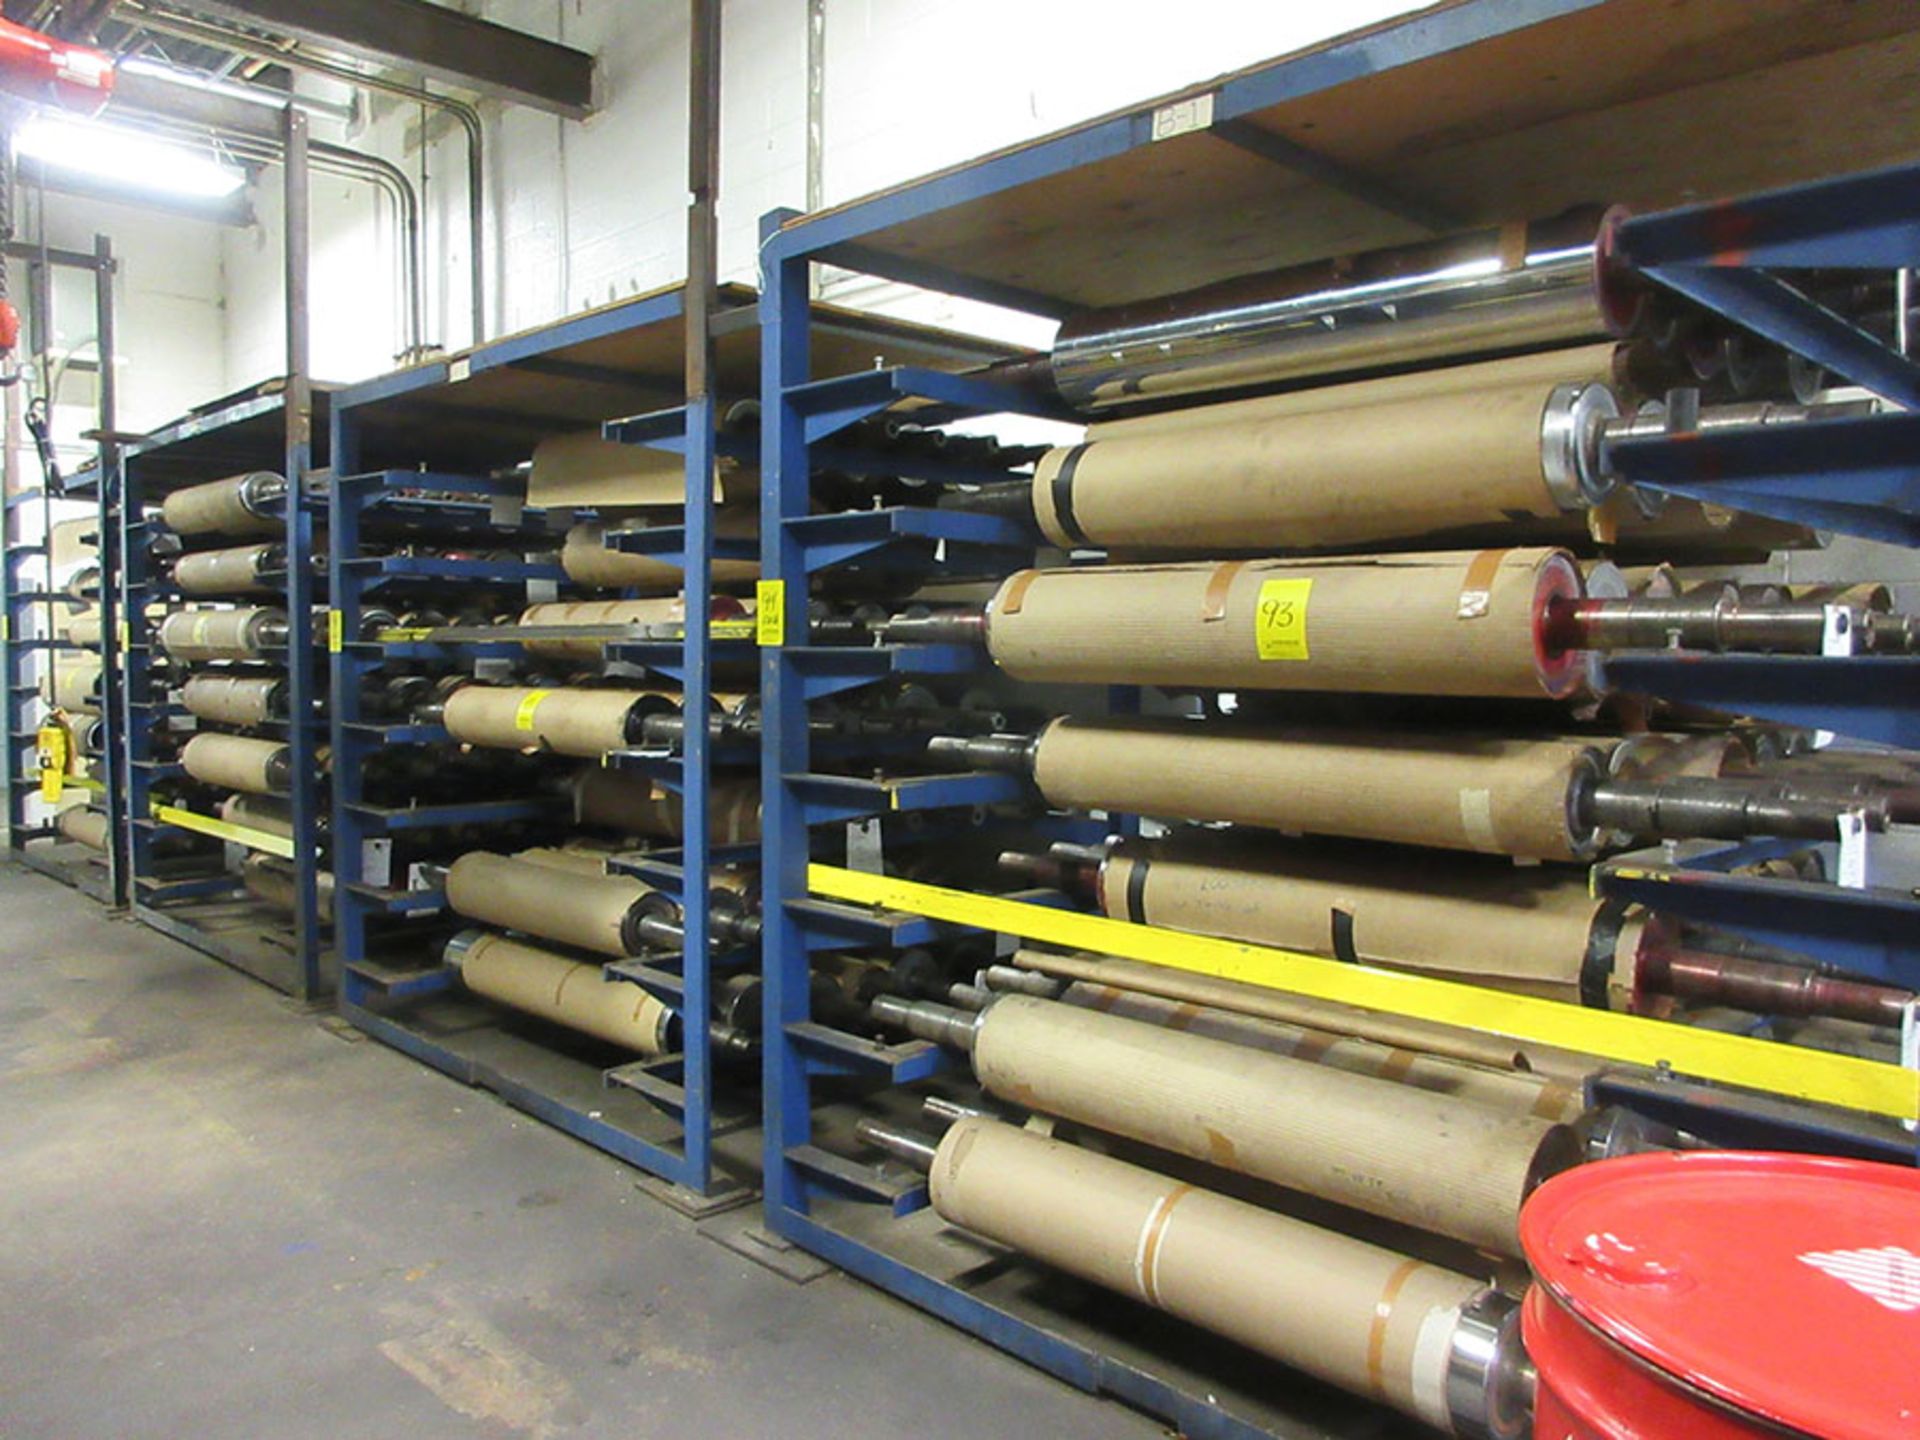 400 +/- ASSORTED PRINT ROLLERS, BASINS, BASIN CARTS, ALL OTHER ACCESSORIES PERTAINING TO PRINT - Image 2 of 14